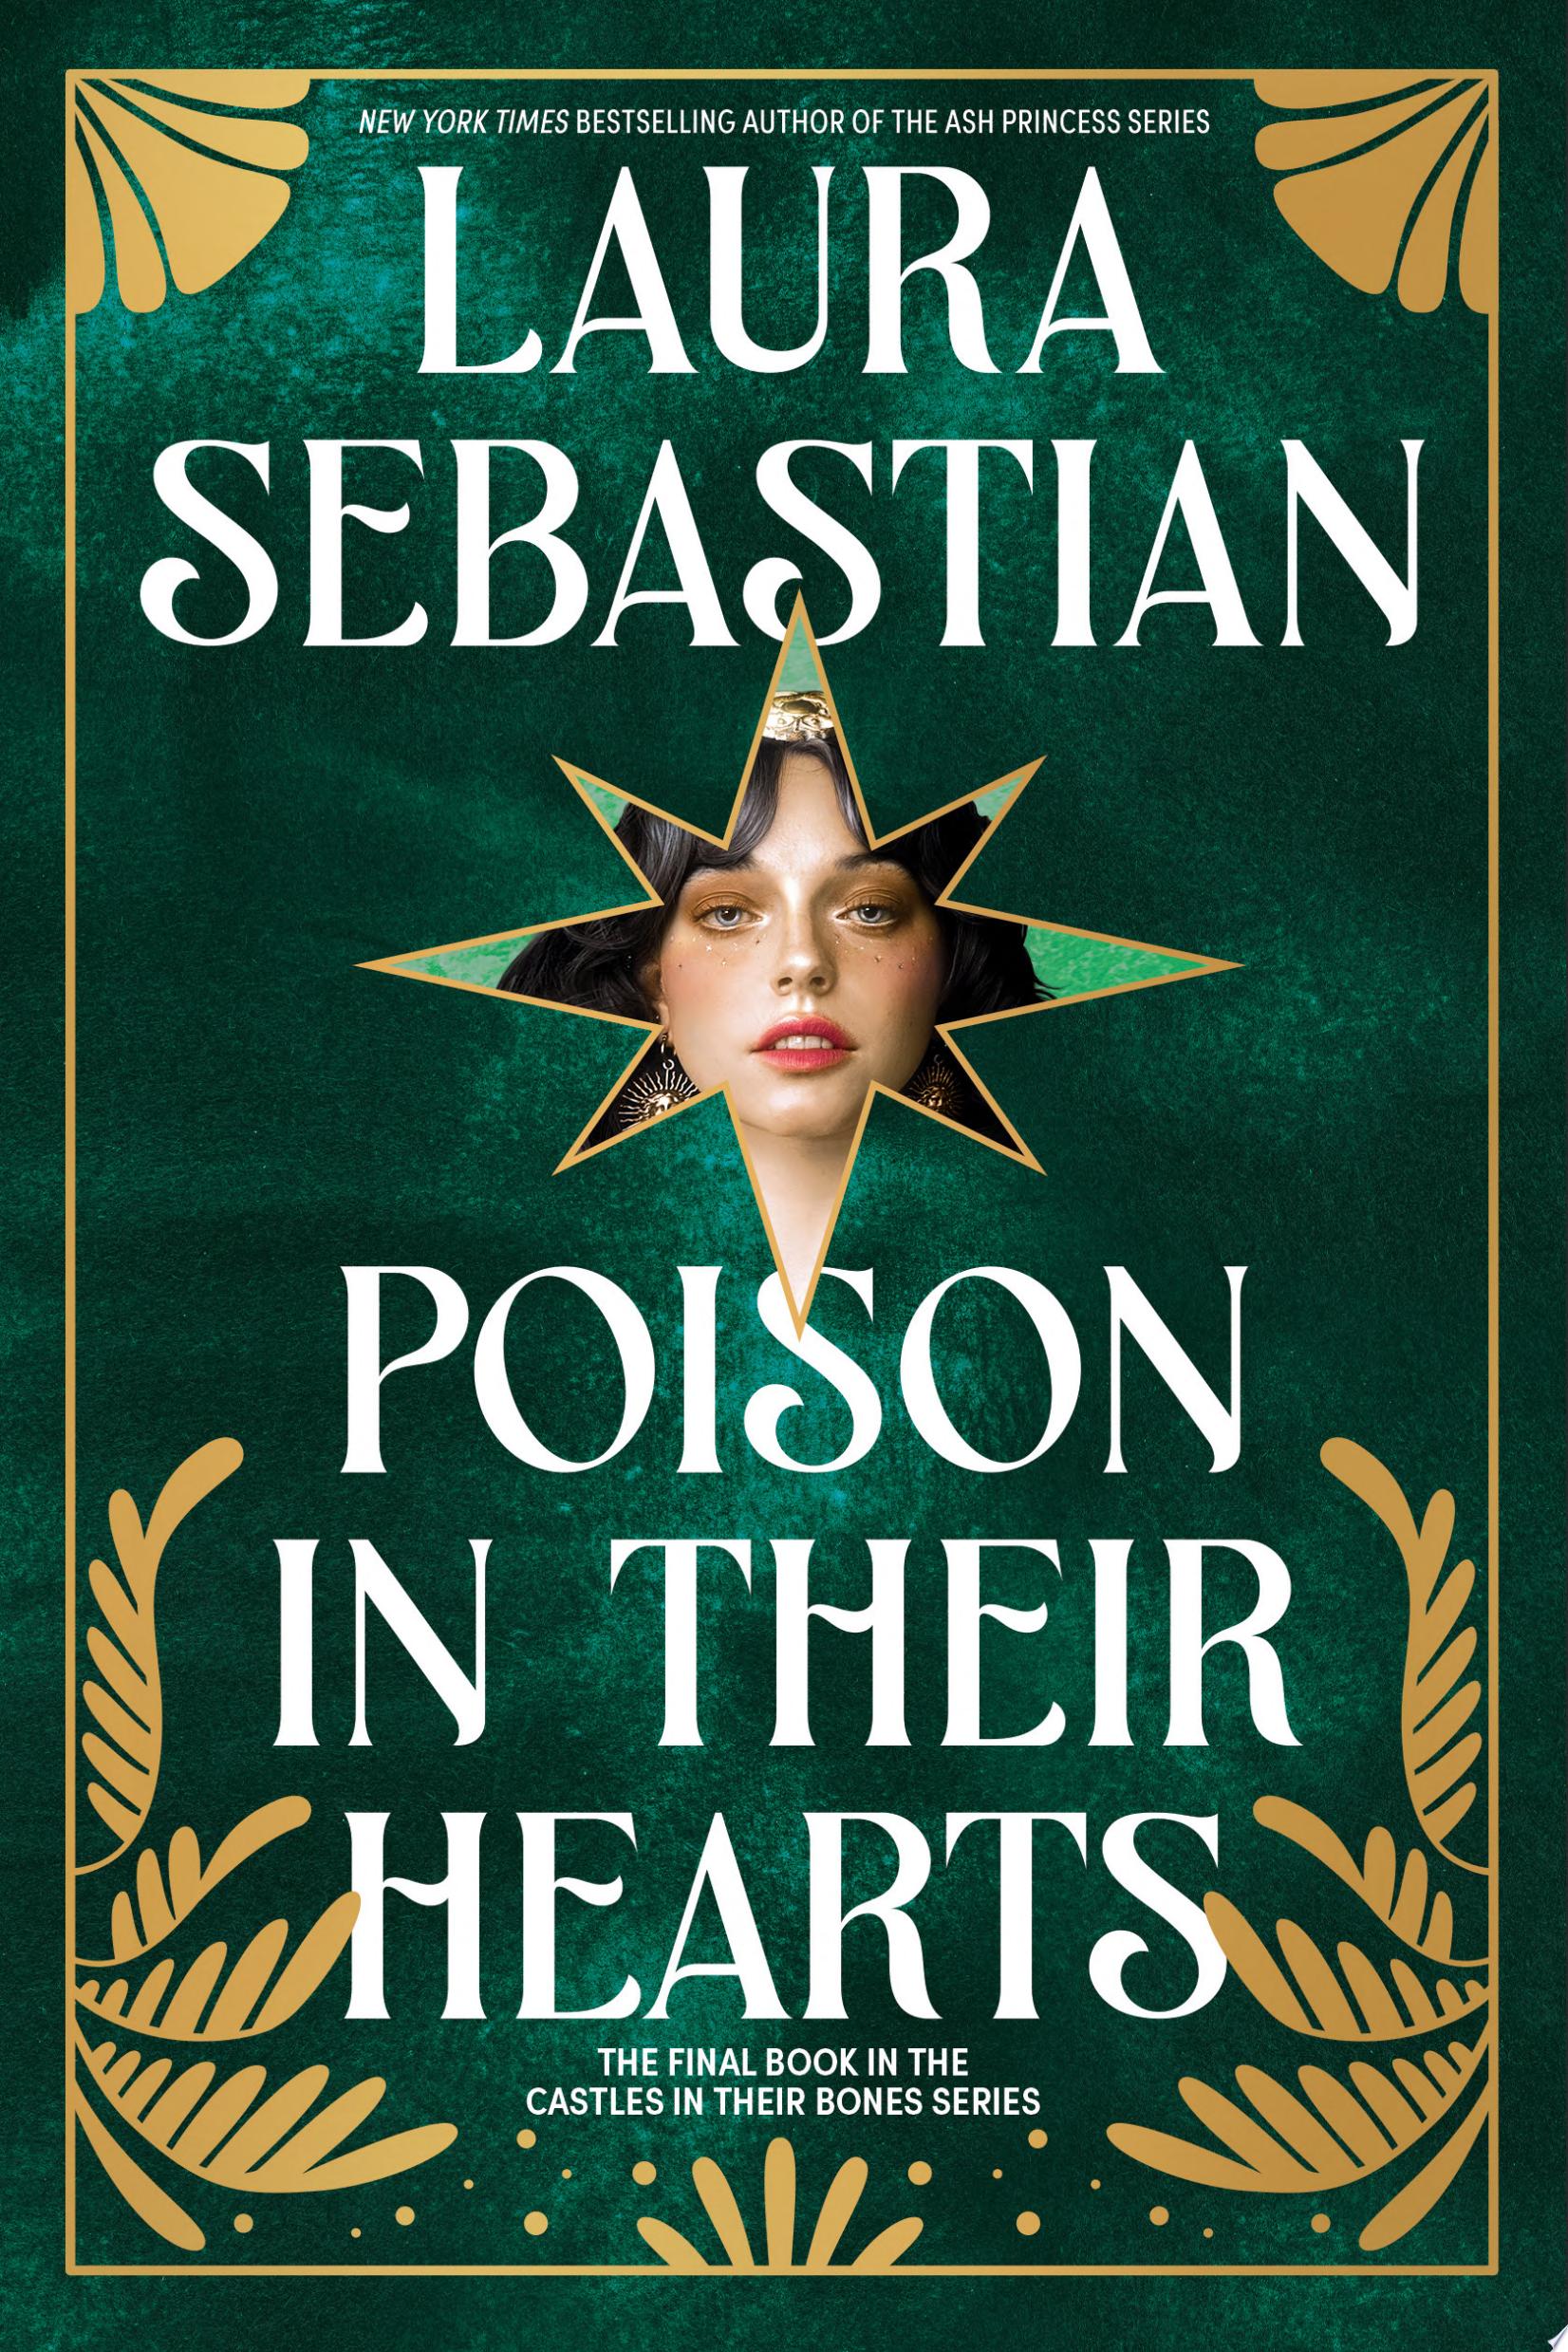 Image for "Poison in Their Hearts"